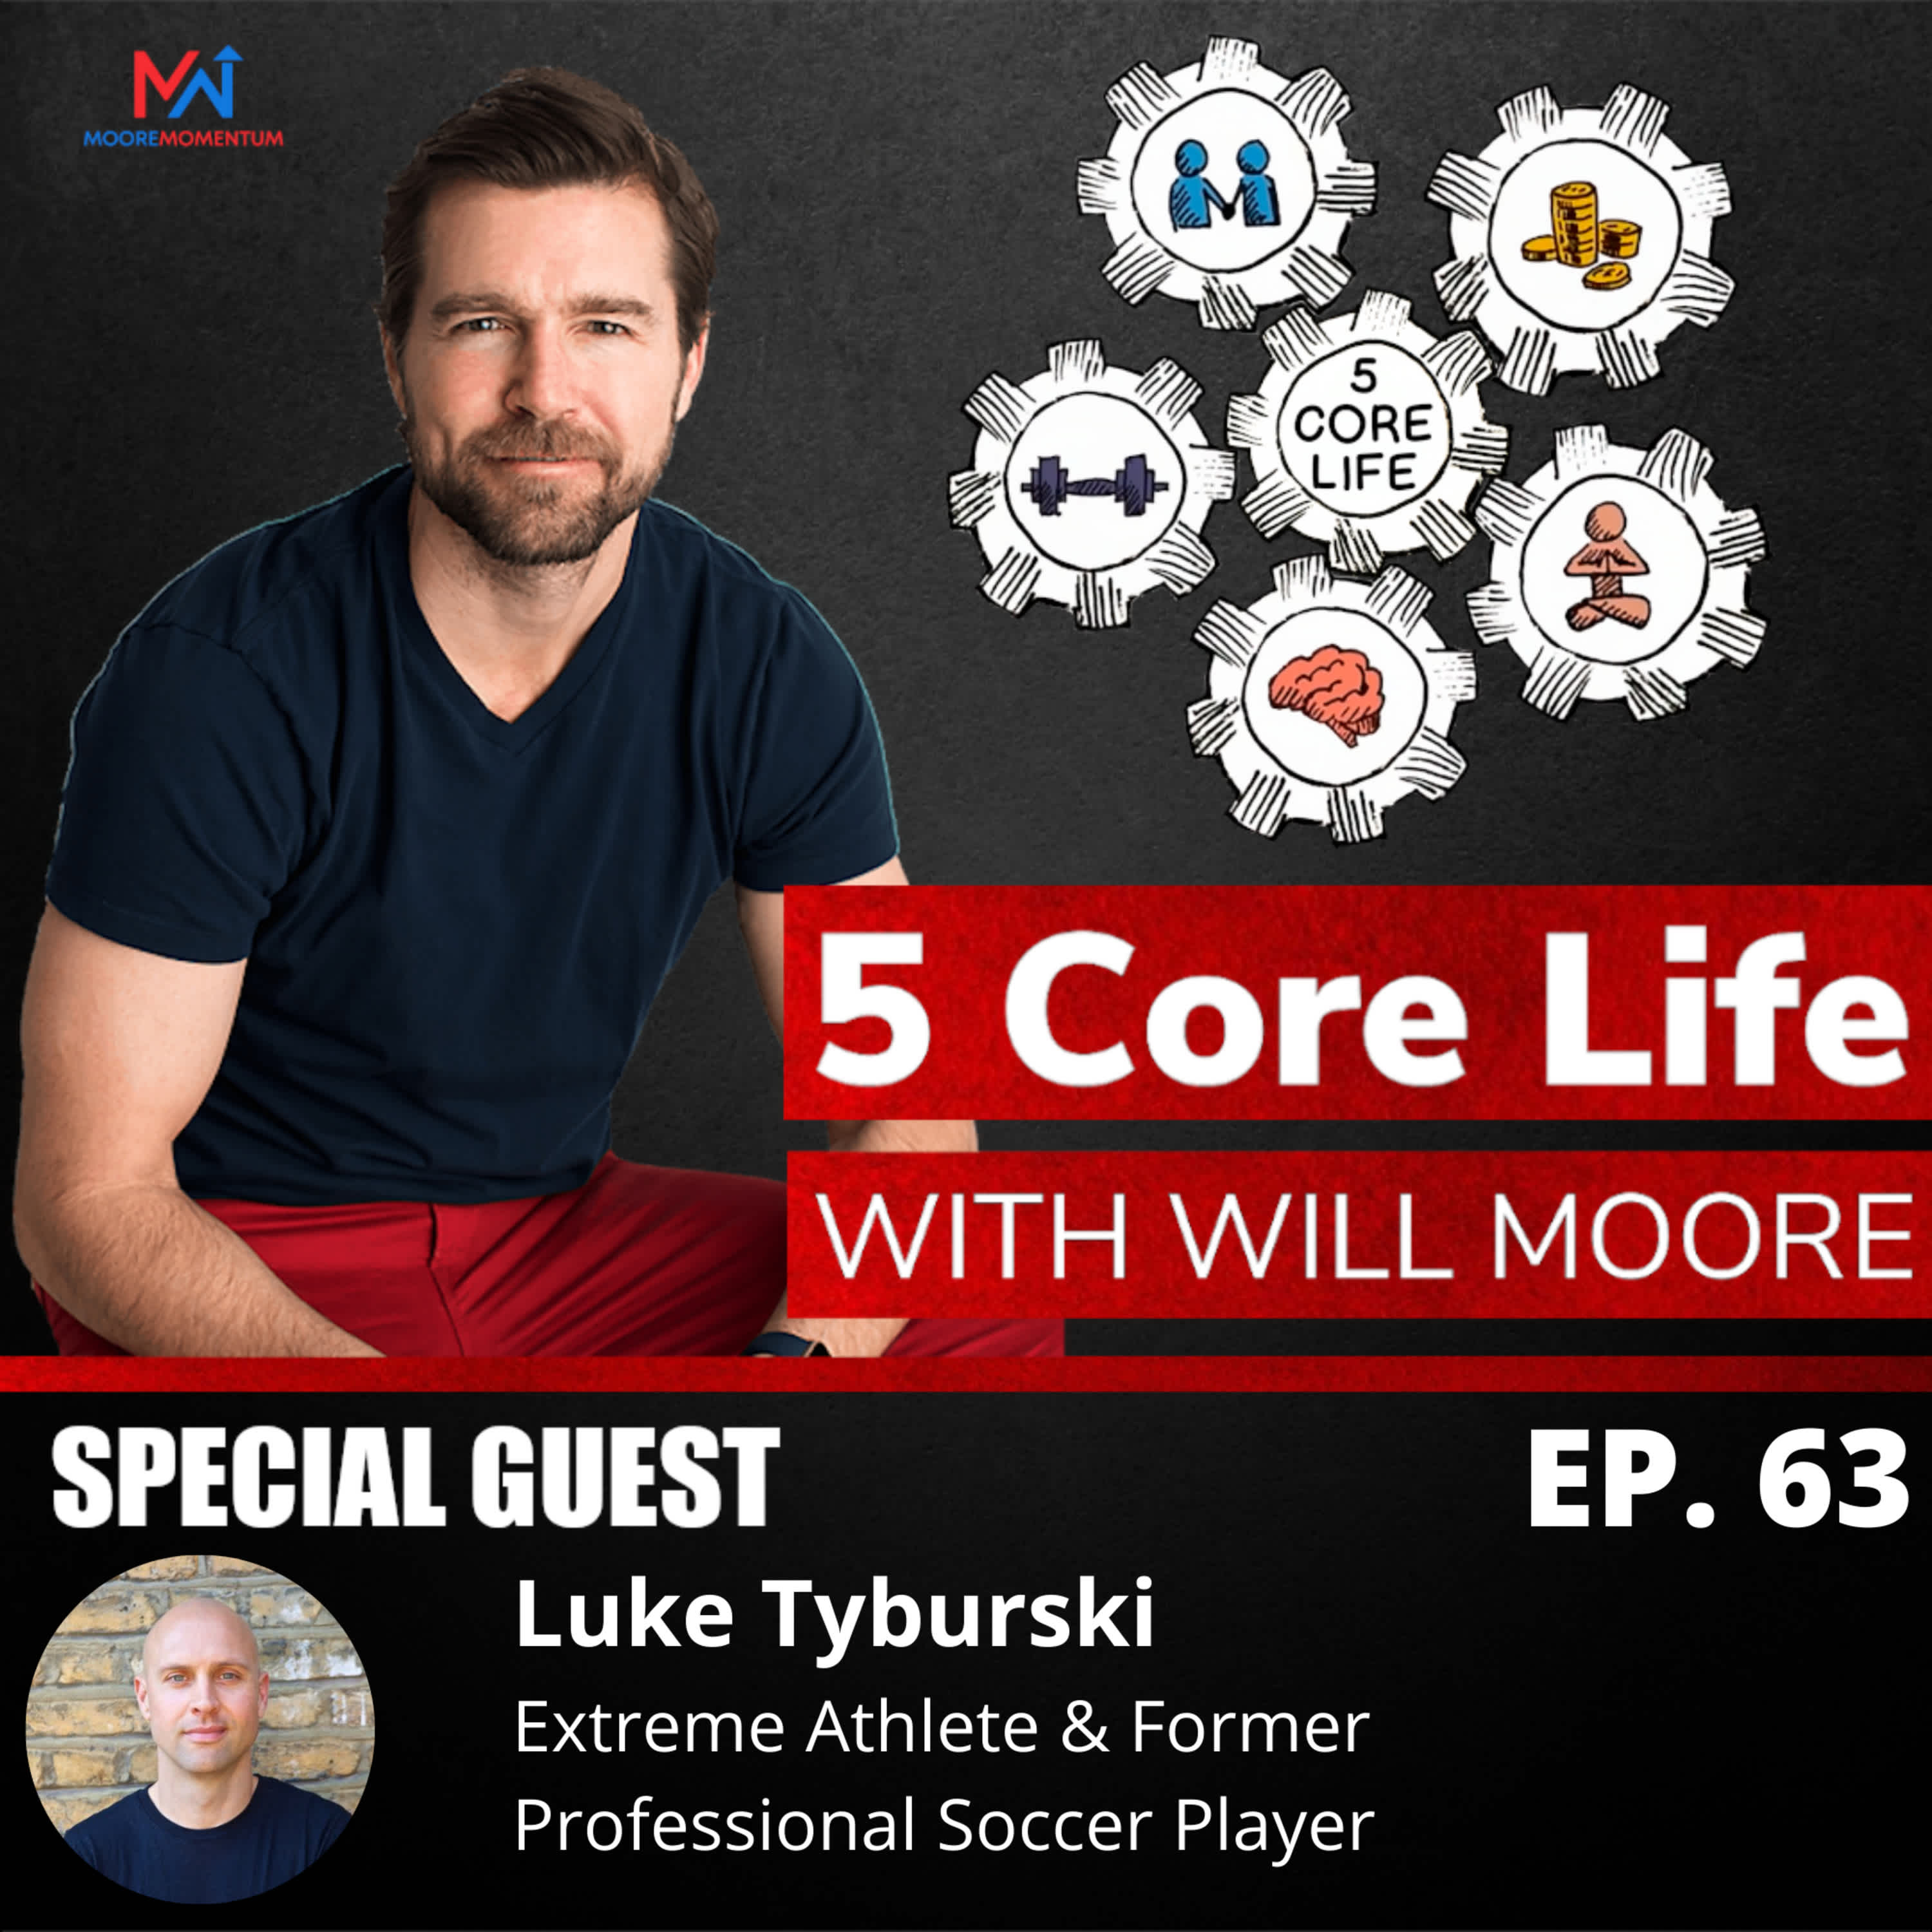 From Contemplating Suicide to Becoming a World Renowned Athlete | Luke Tyburski, Extreme Athlete